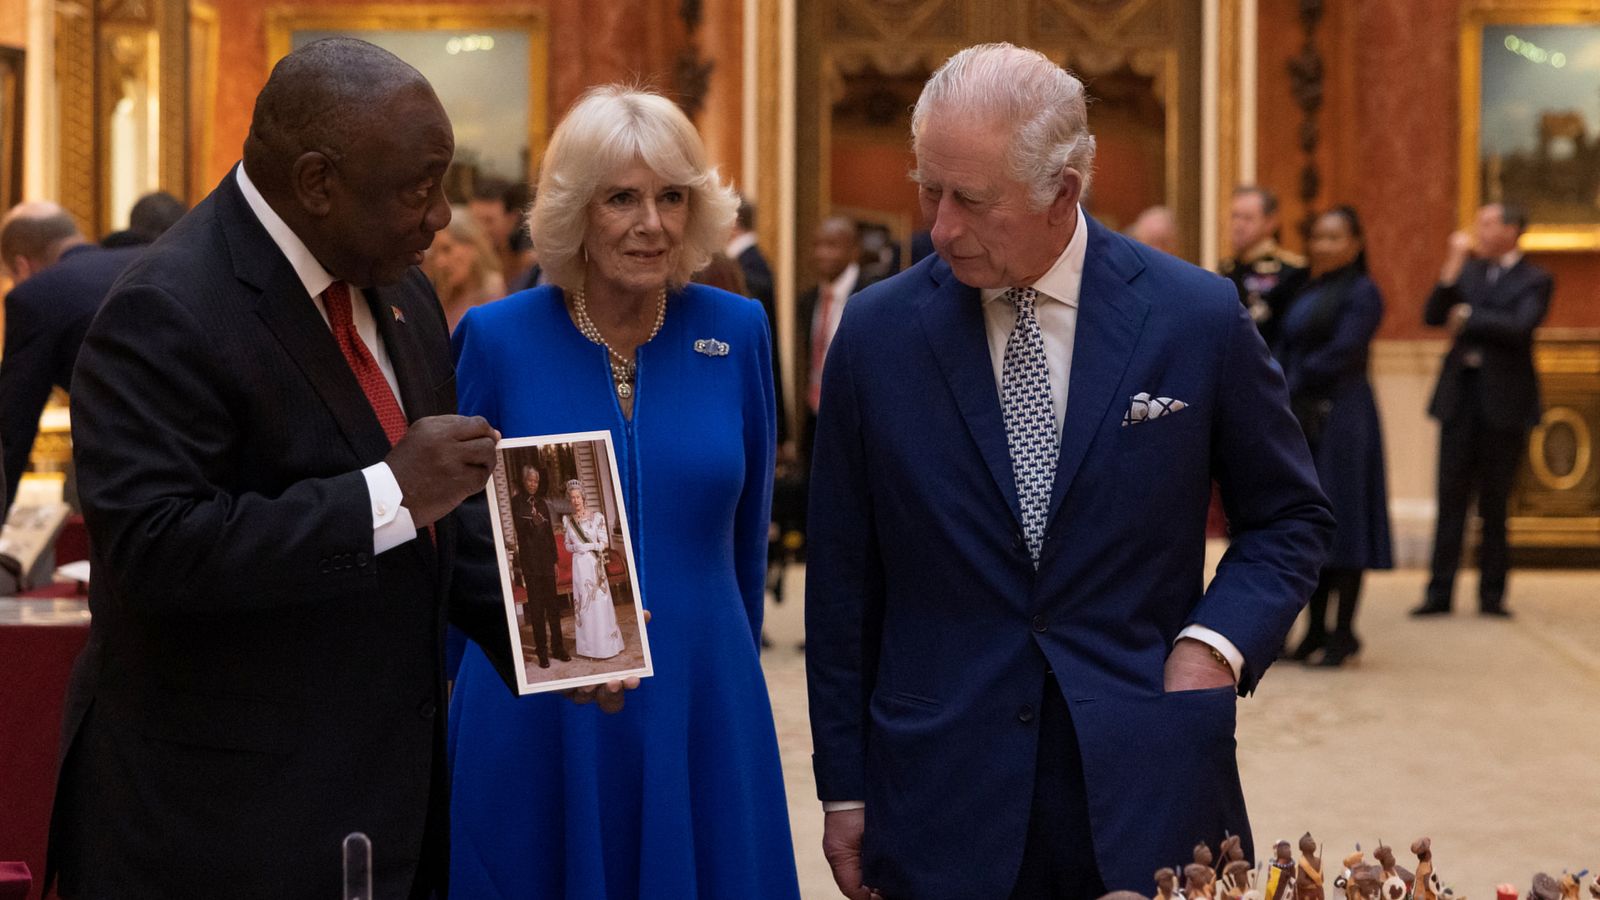 King Charles hosts first state visit as monarch - with South African President Cyril Ramaphosa attending Buckingham Palace and Parliament on day one